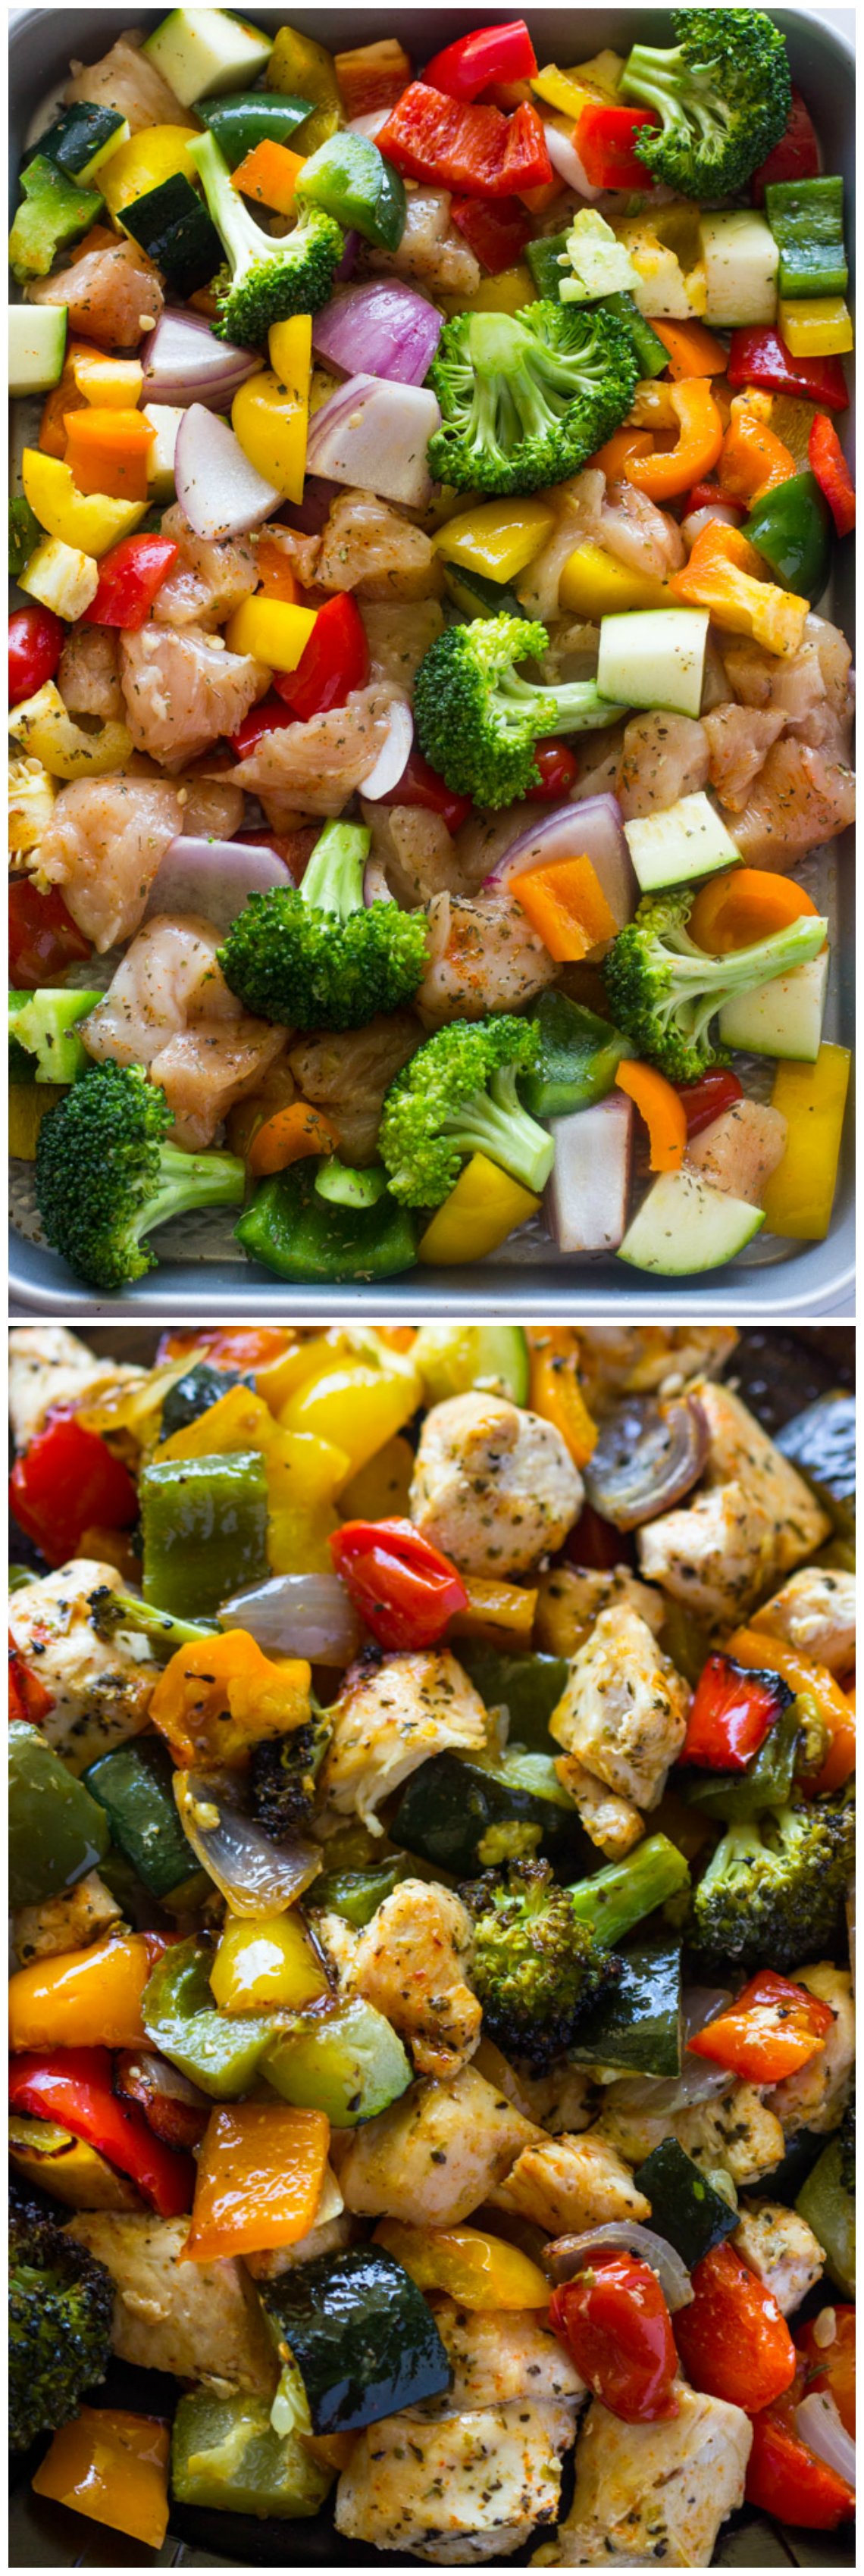 15 Minute Healthy Roasted Chicken and Veggies (Video) |